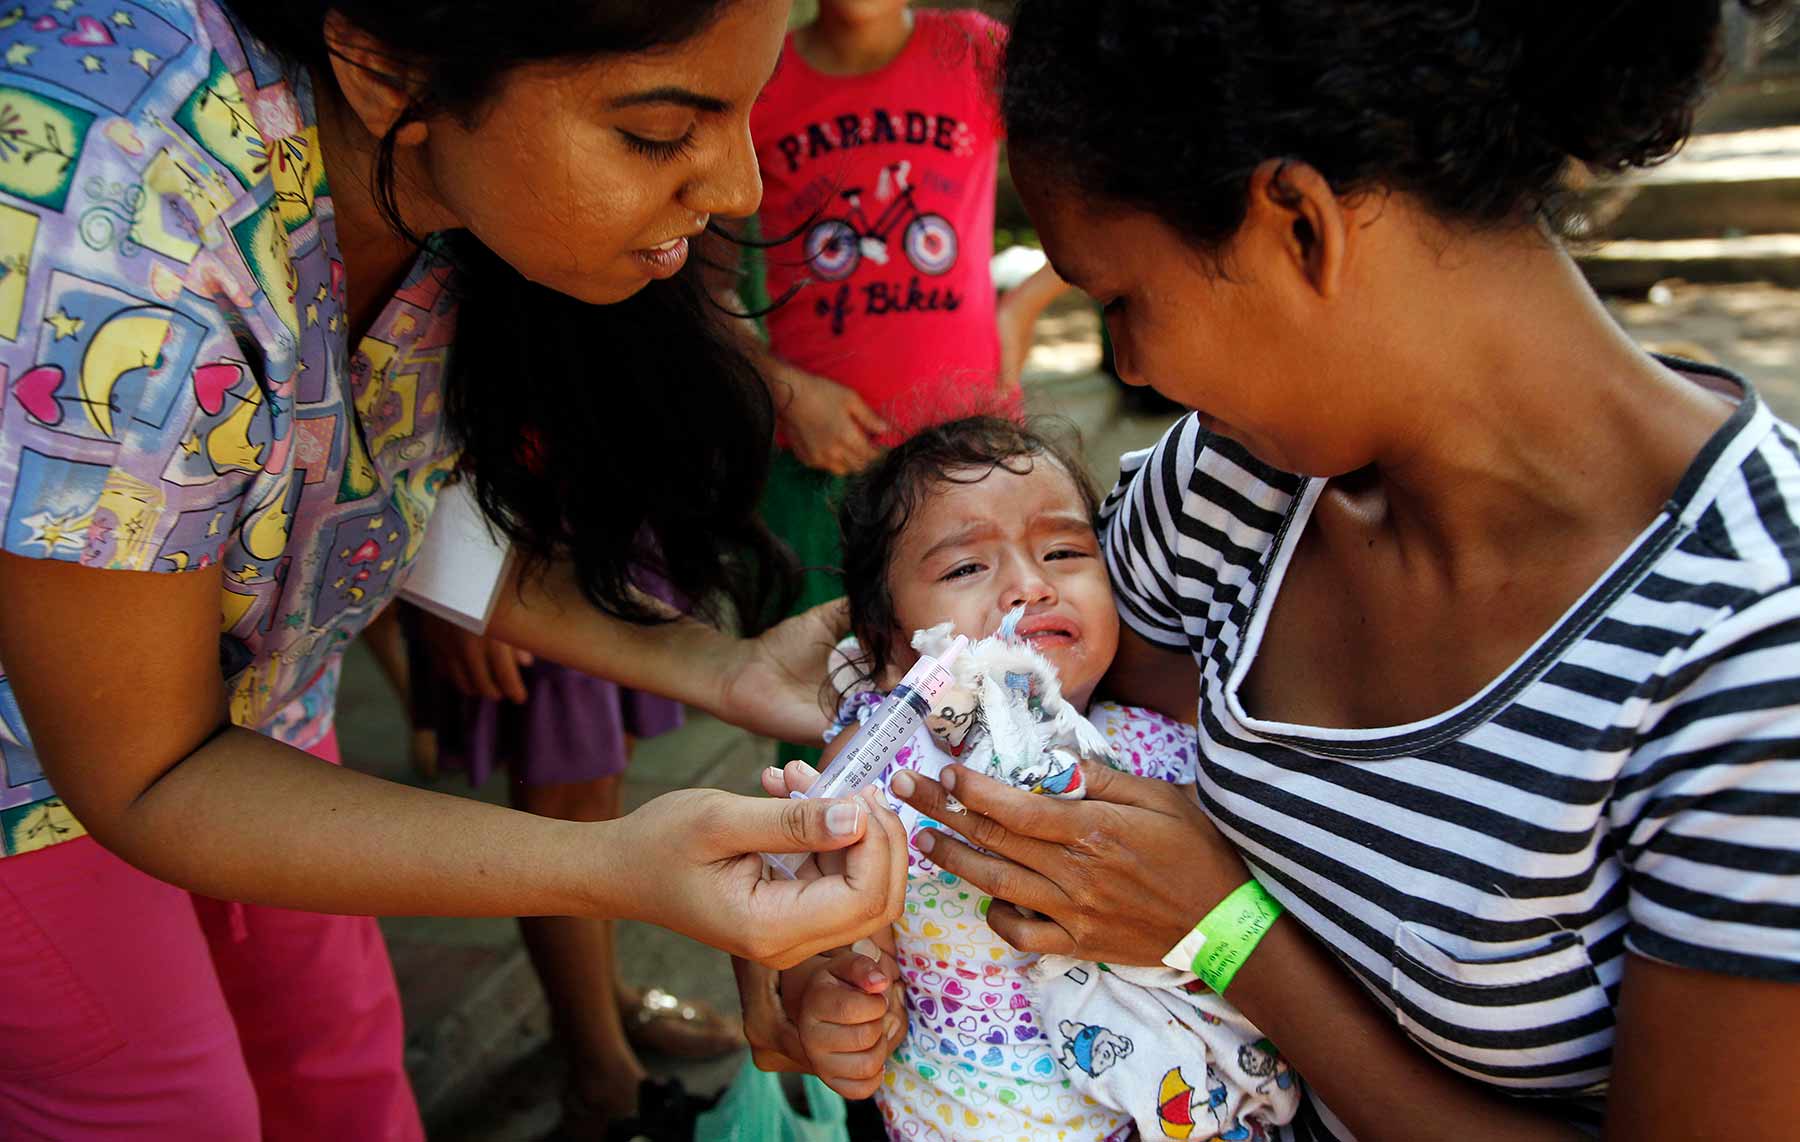 Nursing student Rebecca Sukumar provides medication to a baby who is being comforted by her mother.